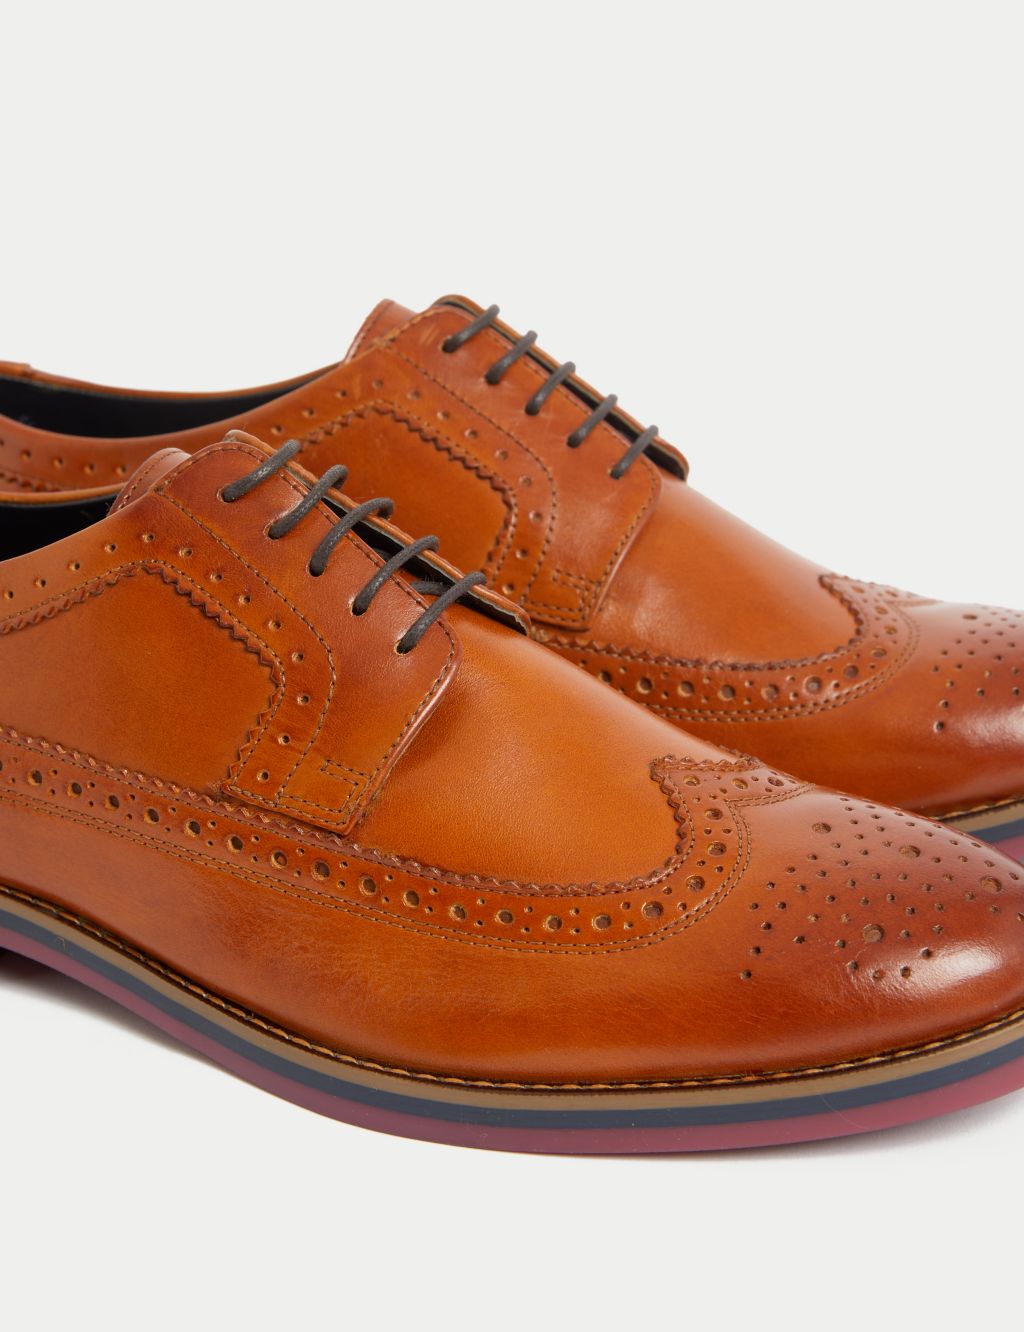 Leather Trisole Brogues image 3